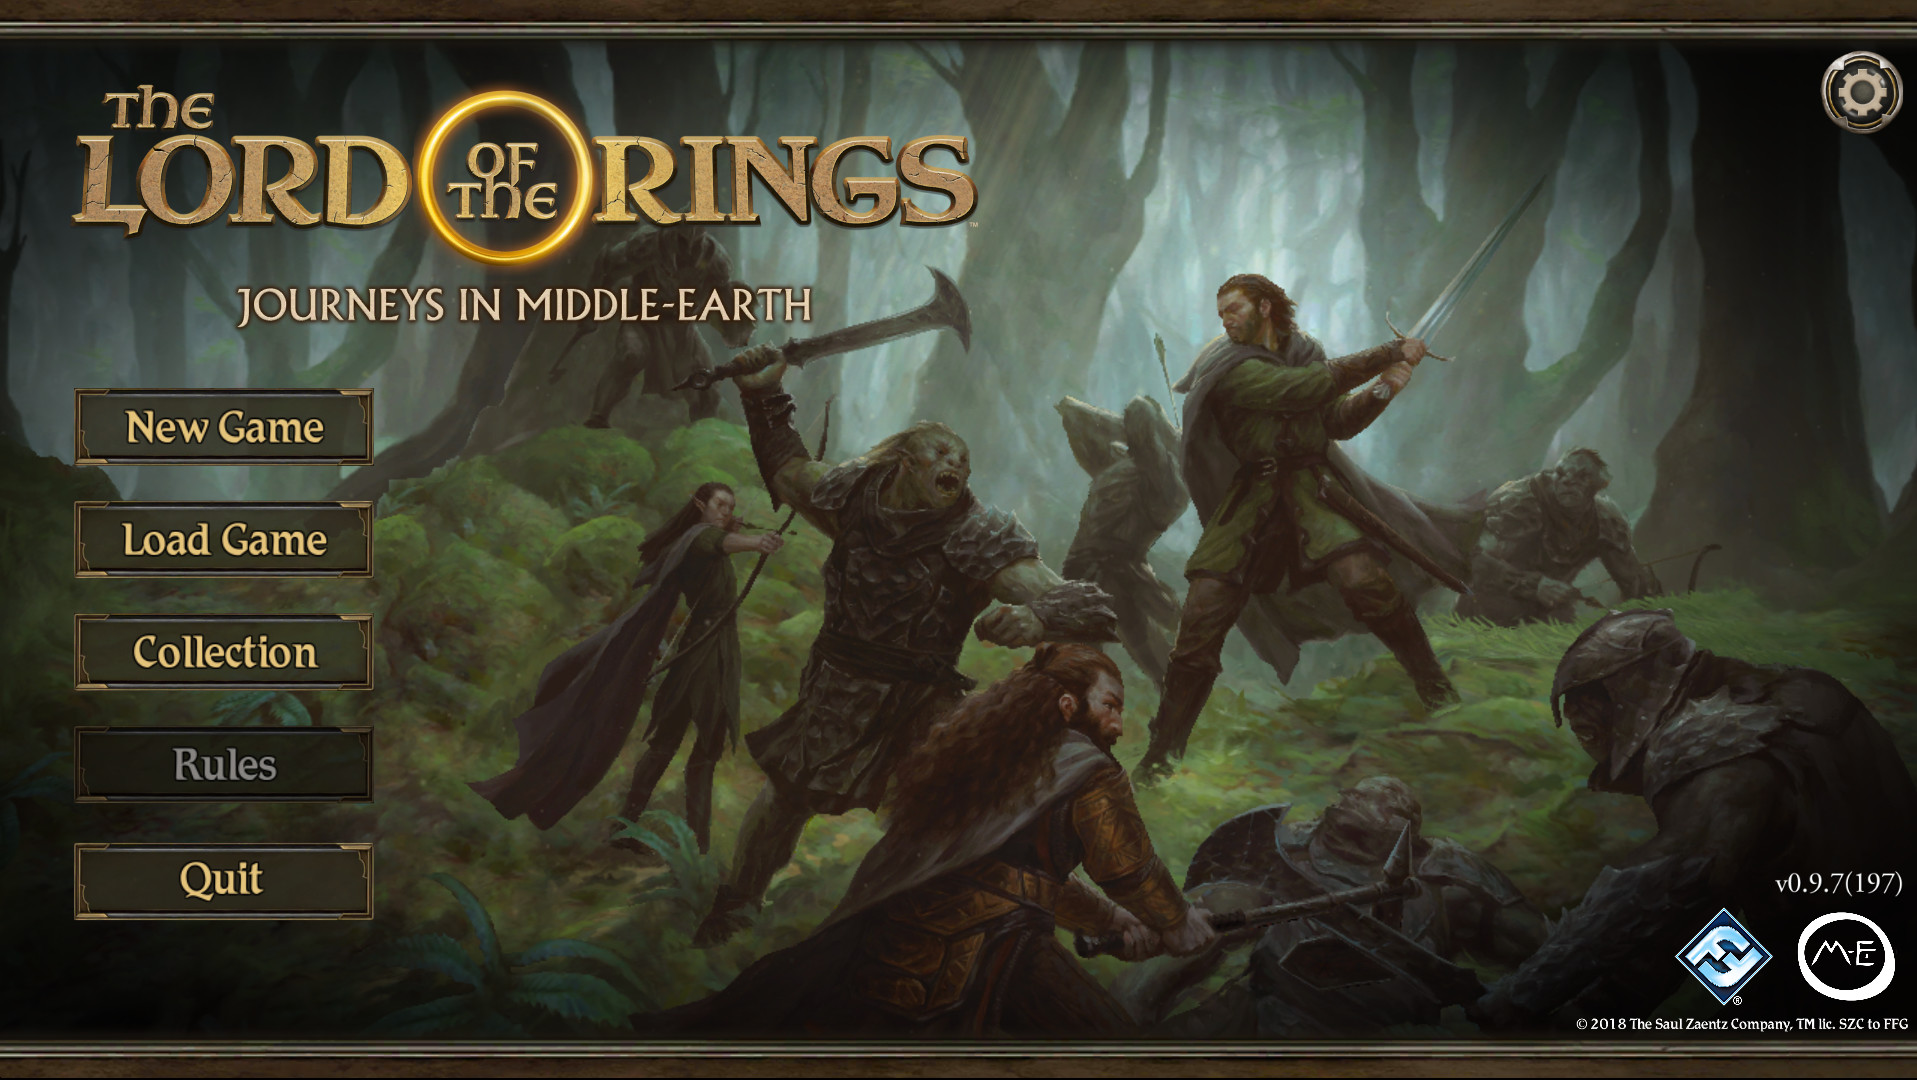 logboek Behoren Hinder The Lord of the Rings: Journeys in Middle-earth on Steam